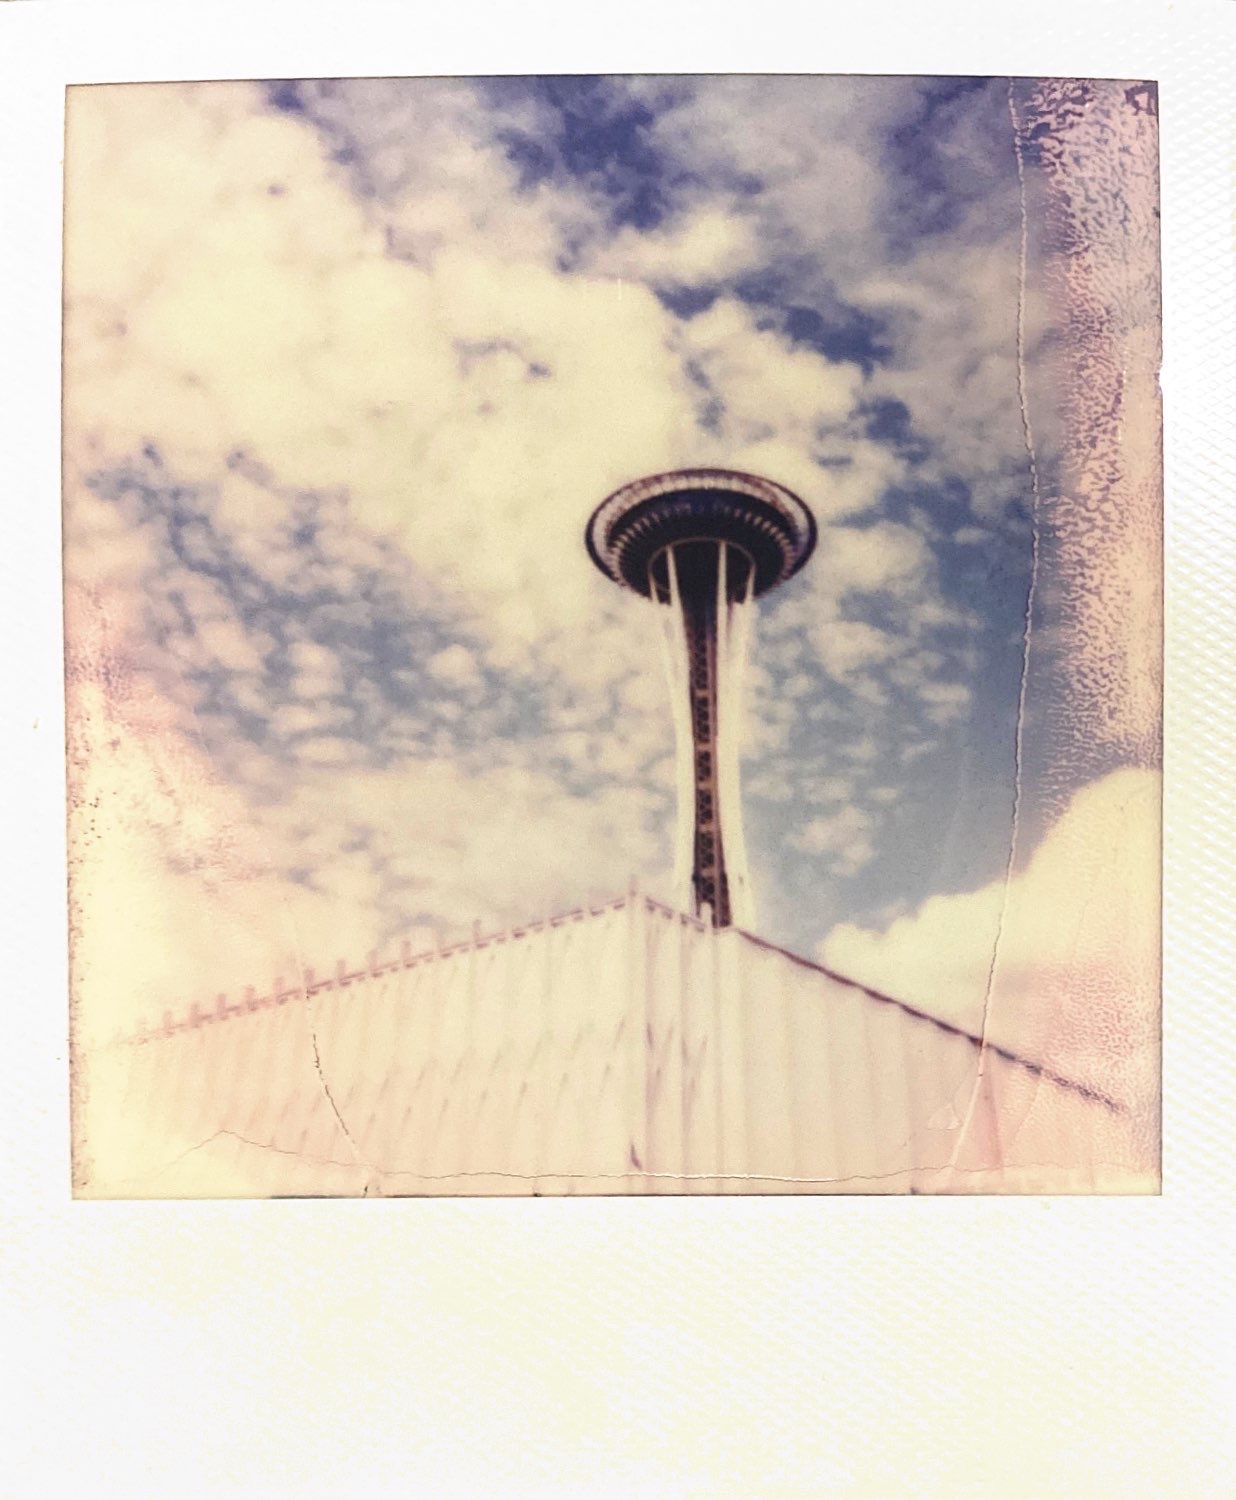 this is a polaroid of the Space Needle